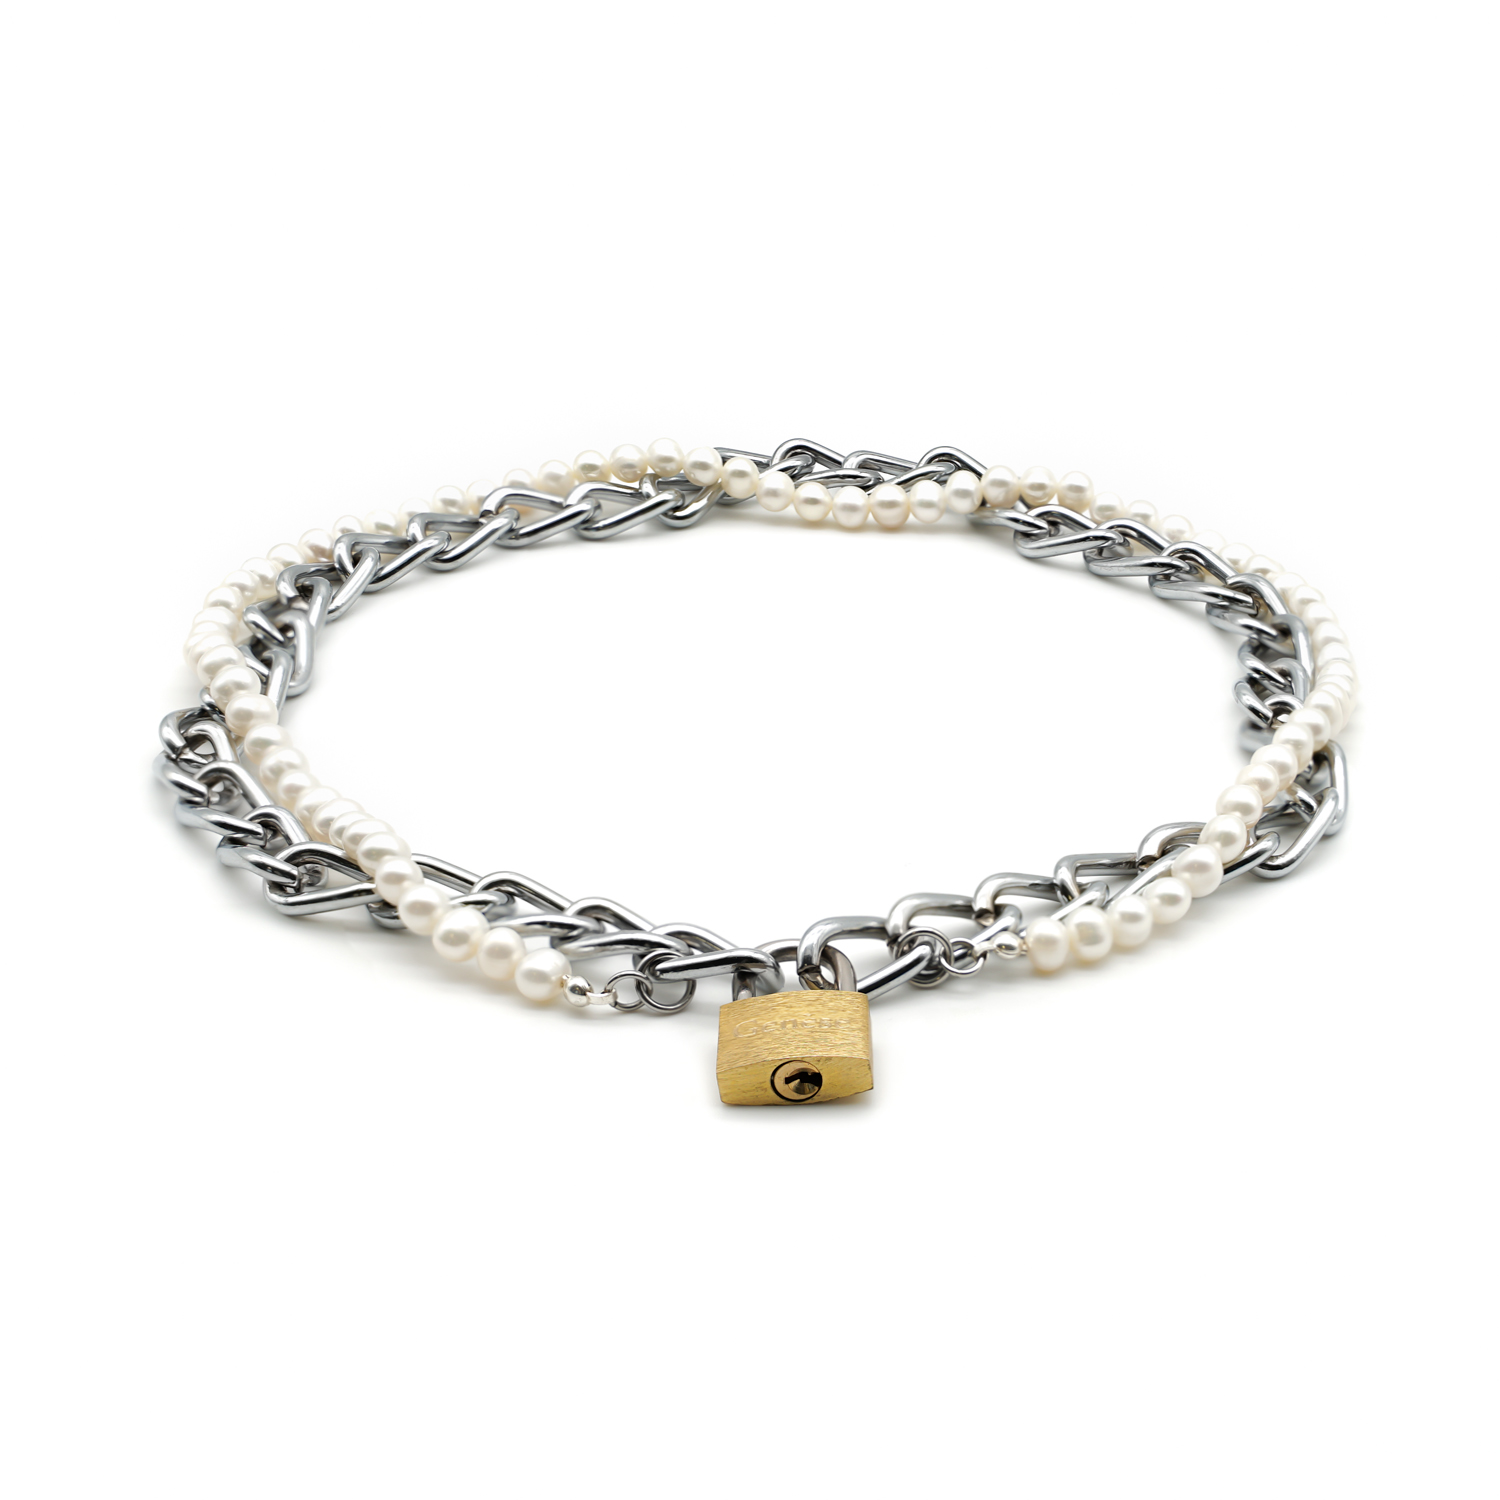 padlock_pearl_necklace_1500x1500_02